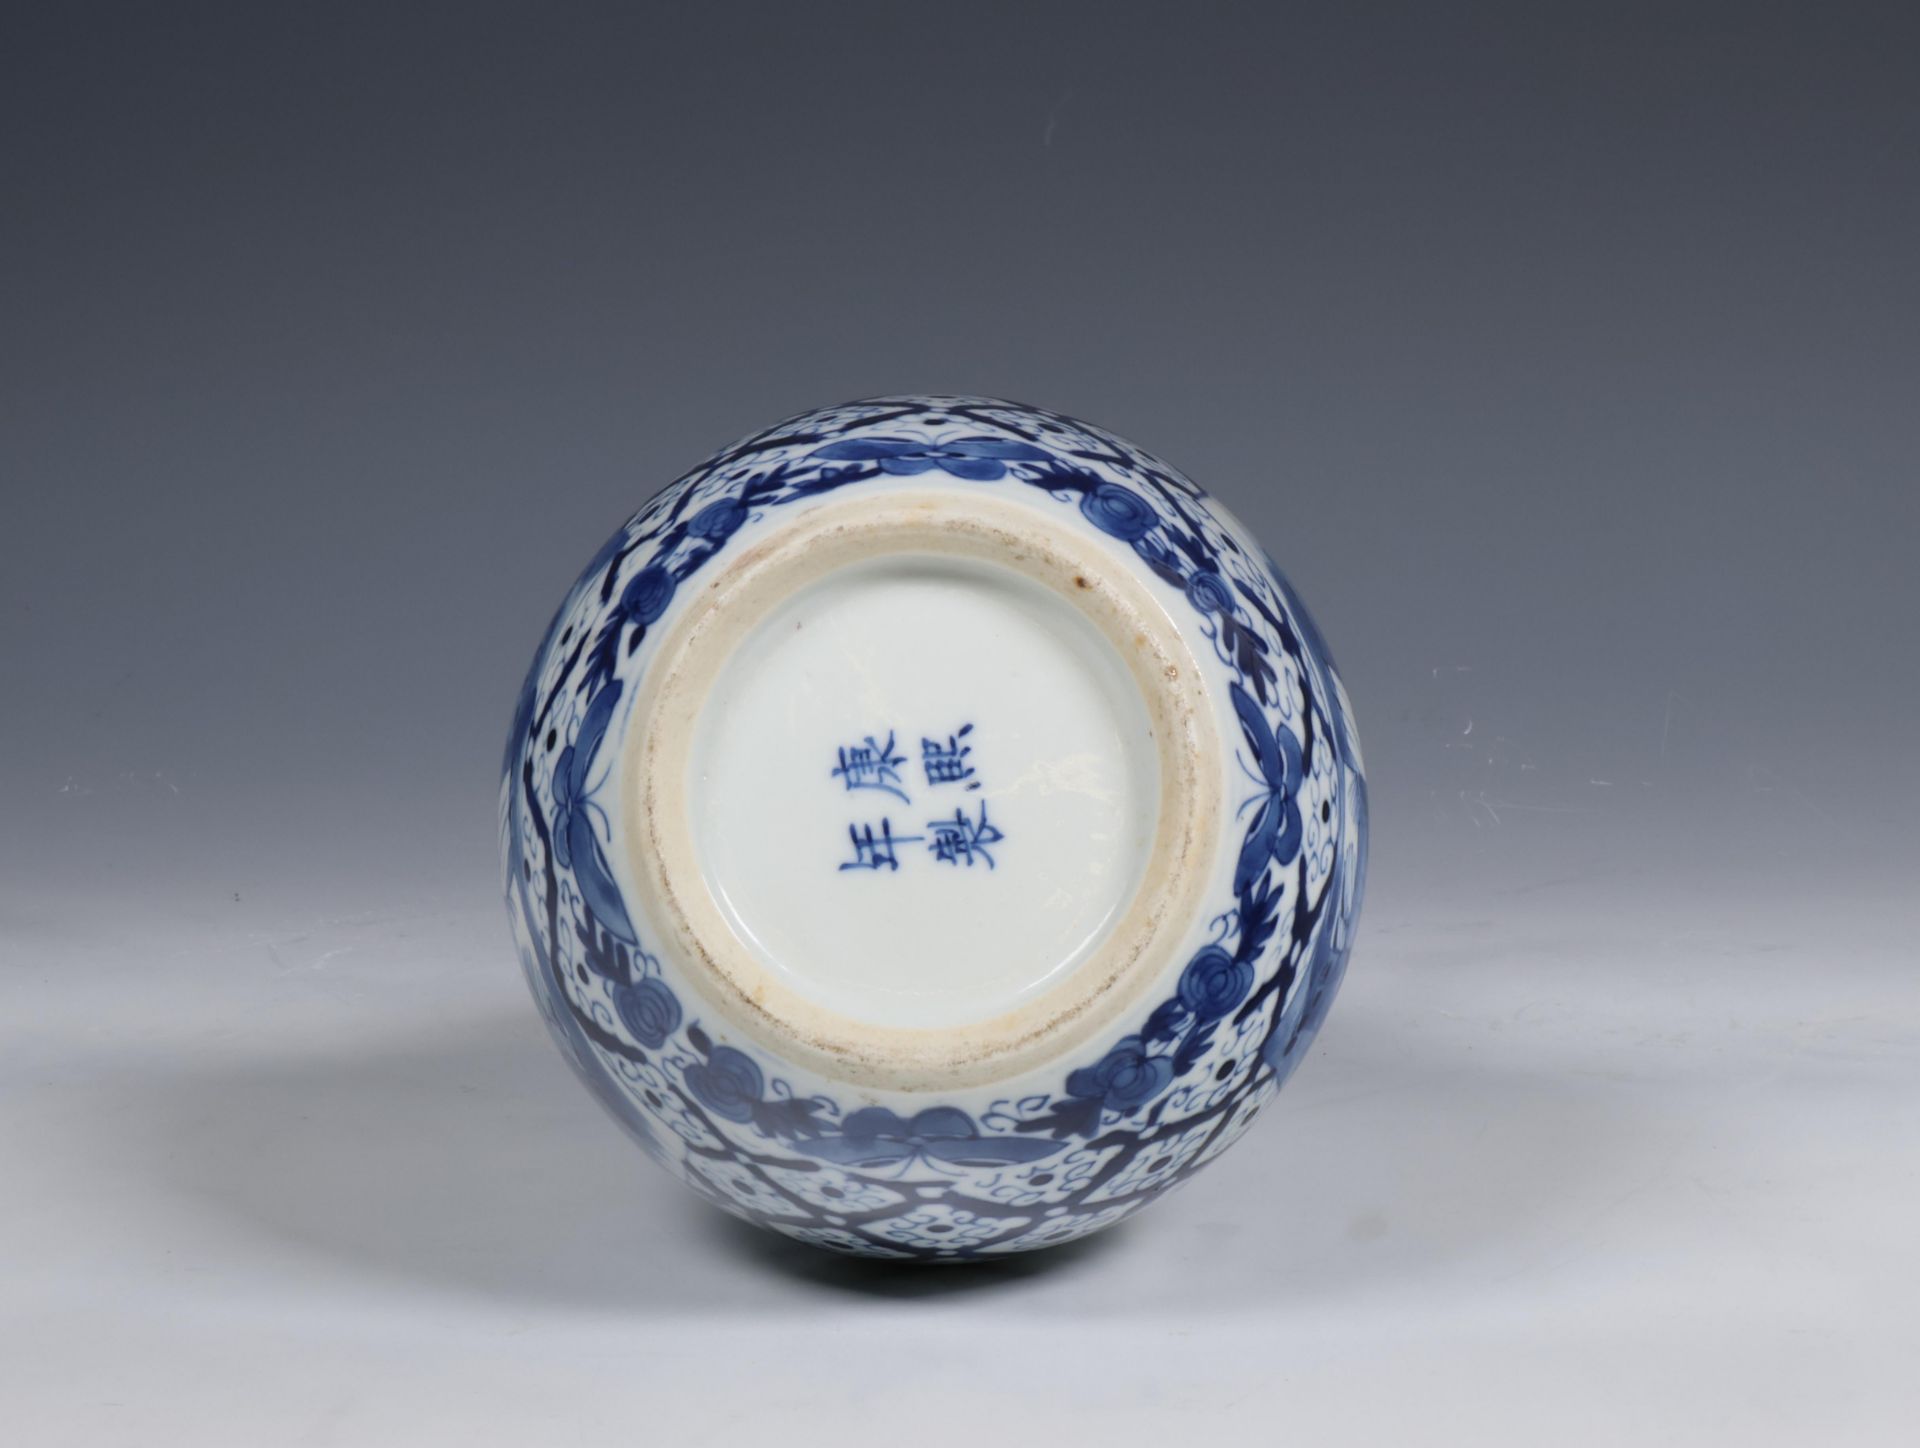 China, blue and white porcelain double-gourd vase, 19th century, - Image 6 of 6